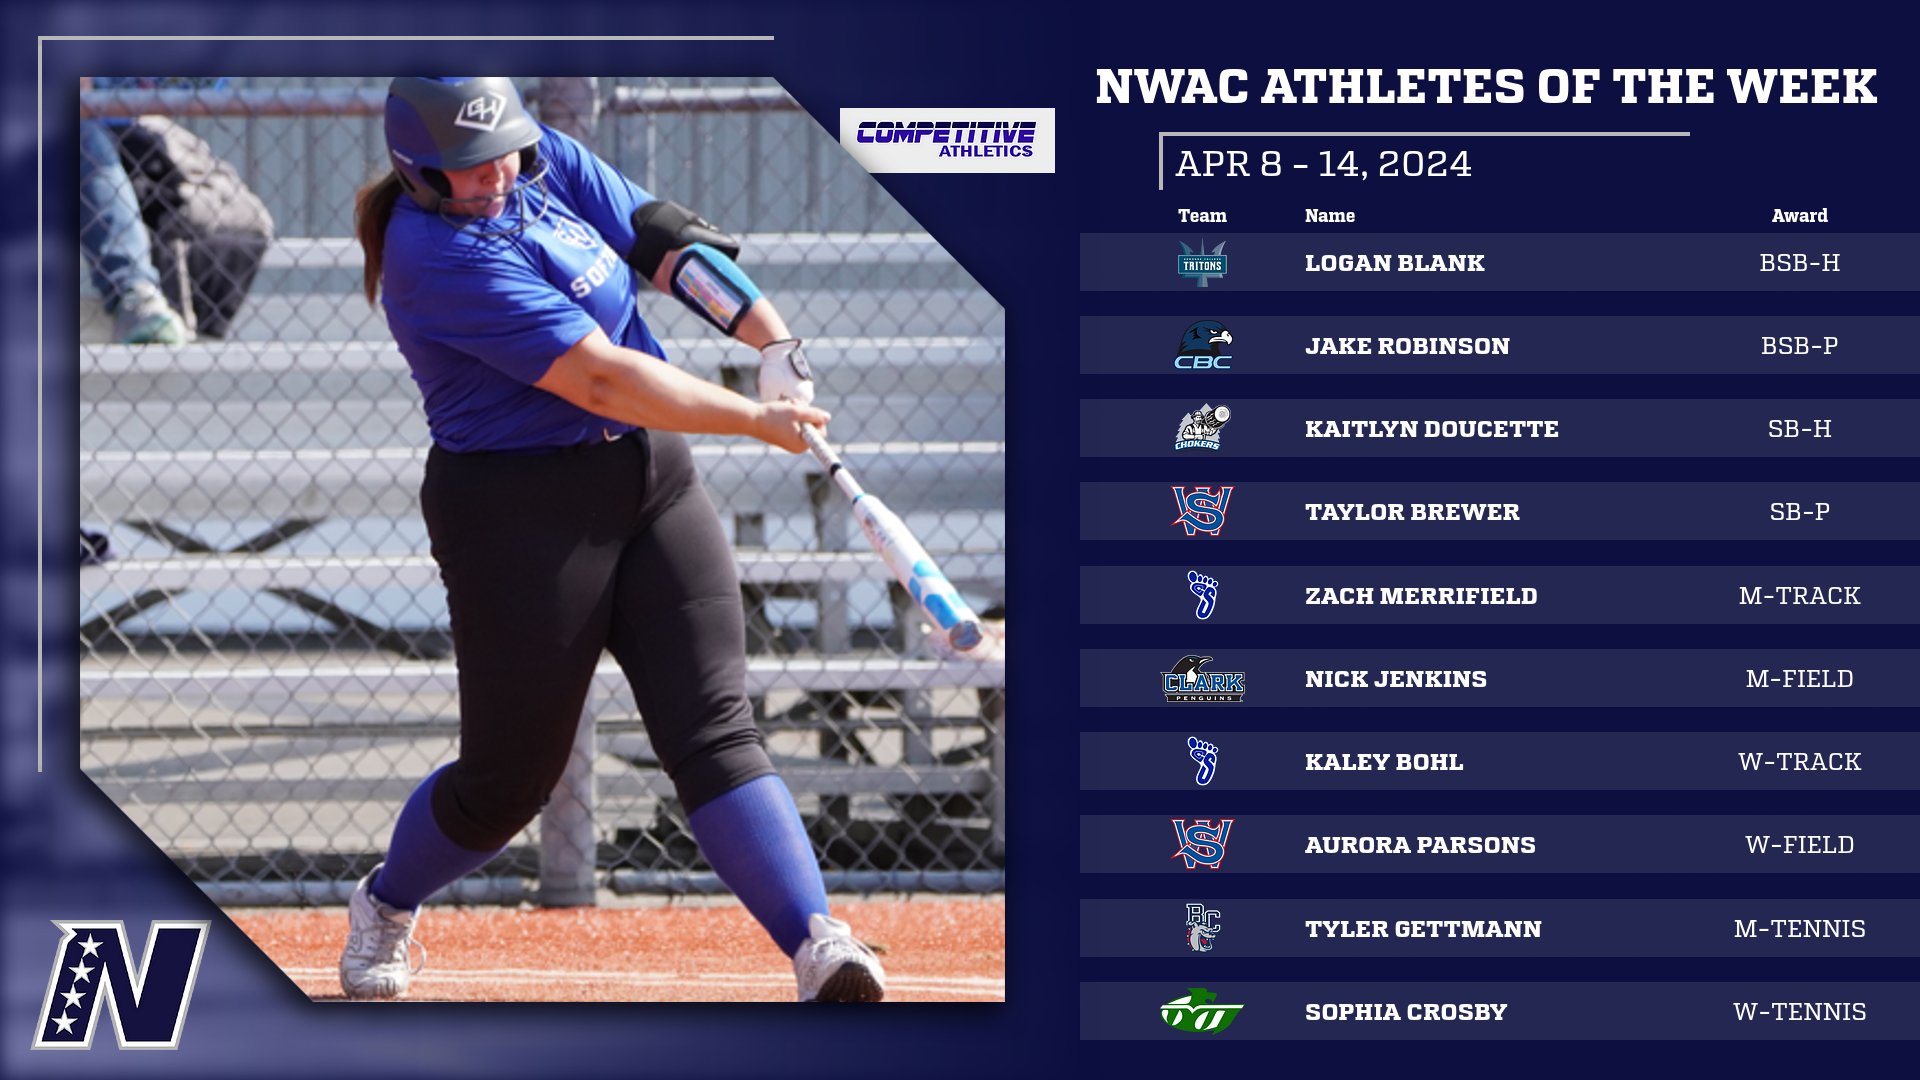 Competitive Athletics NWAC Athletes of the Week: April 8 - 14